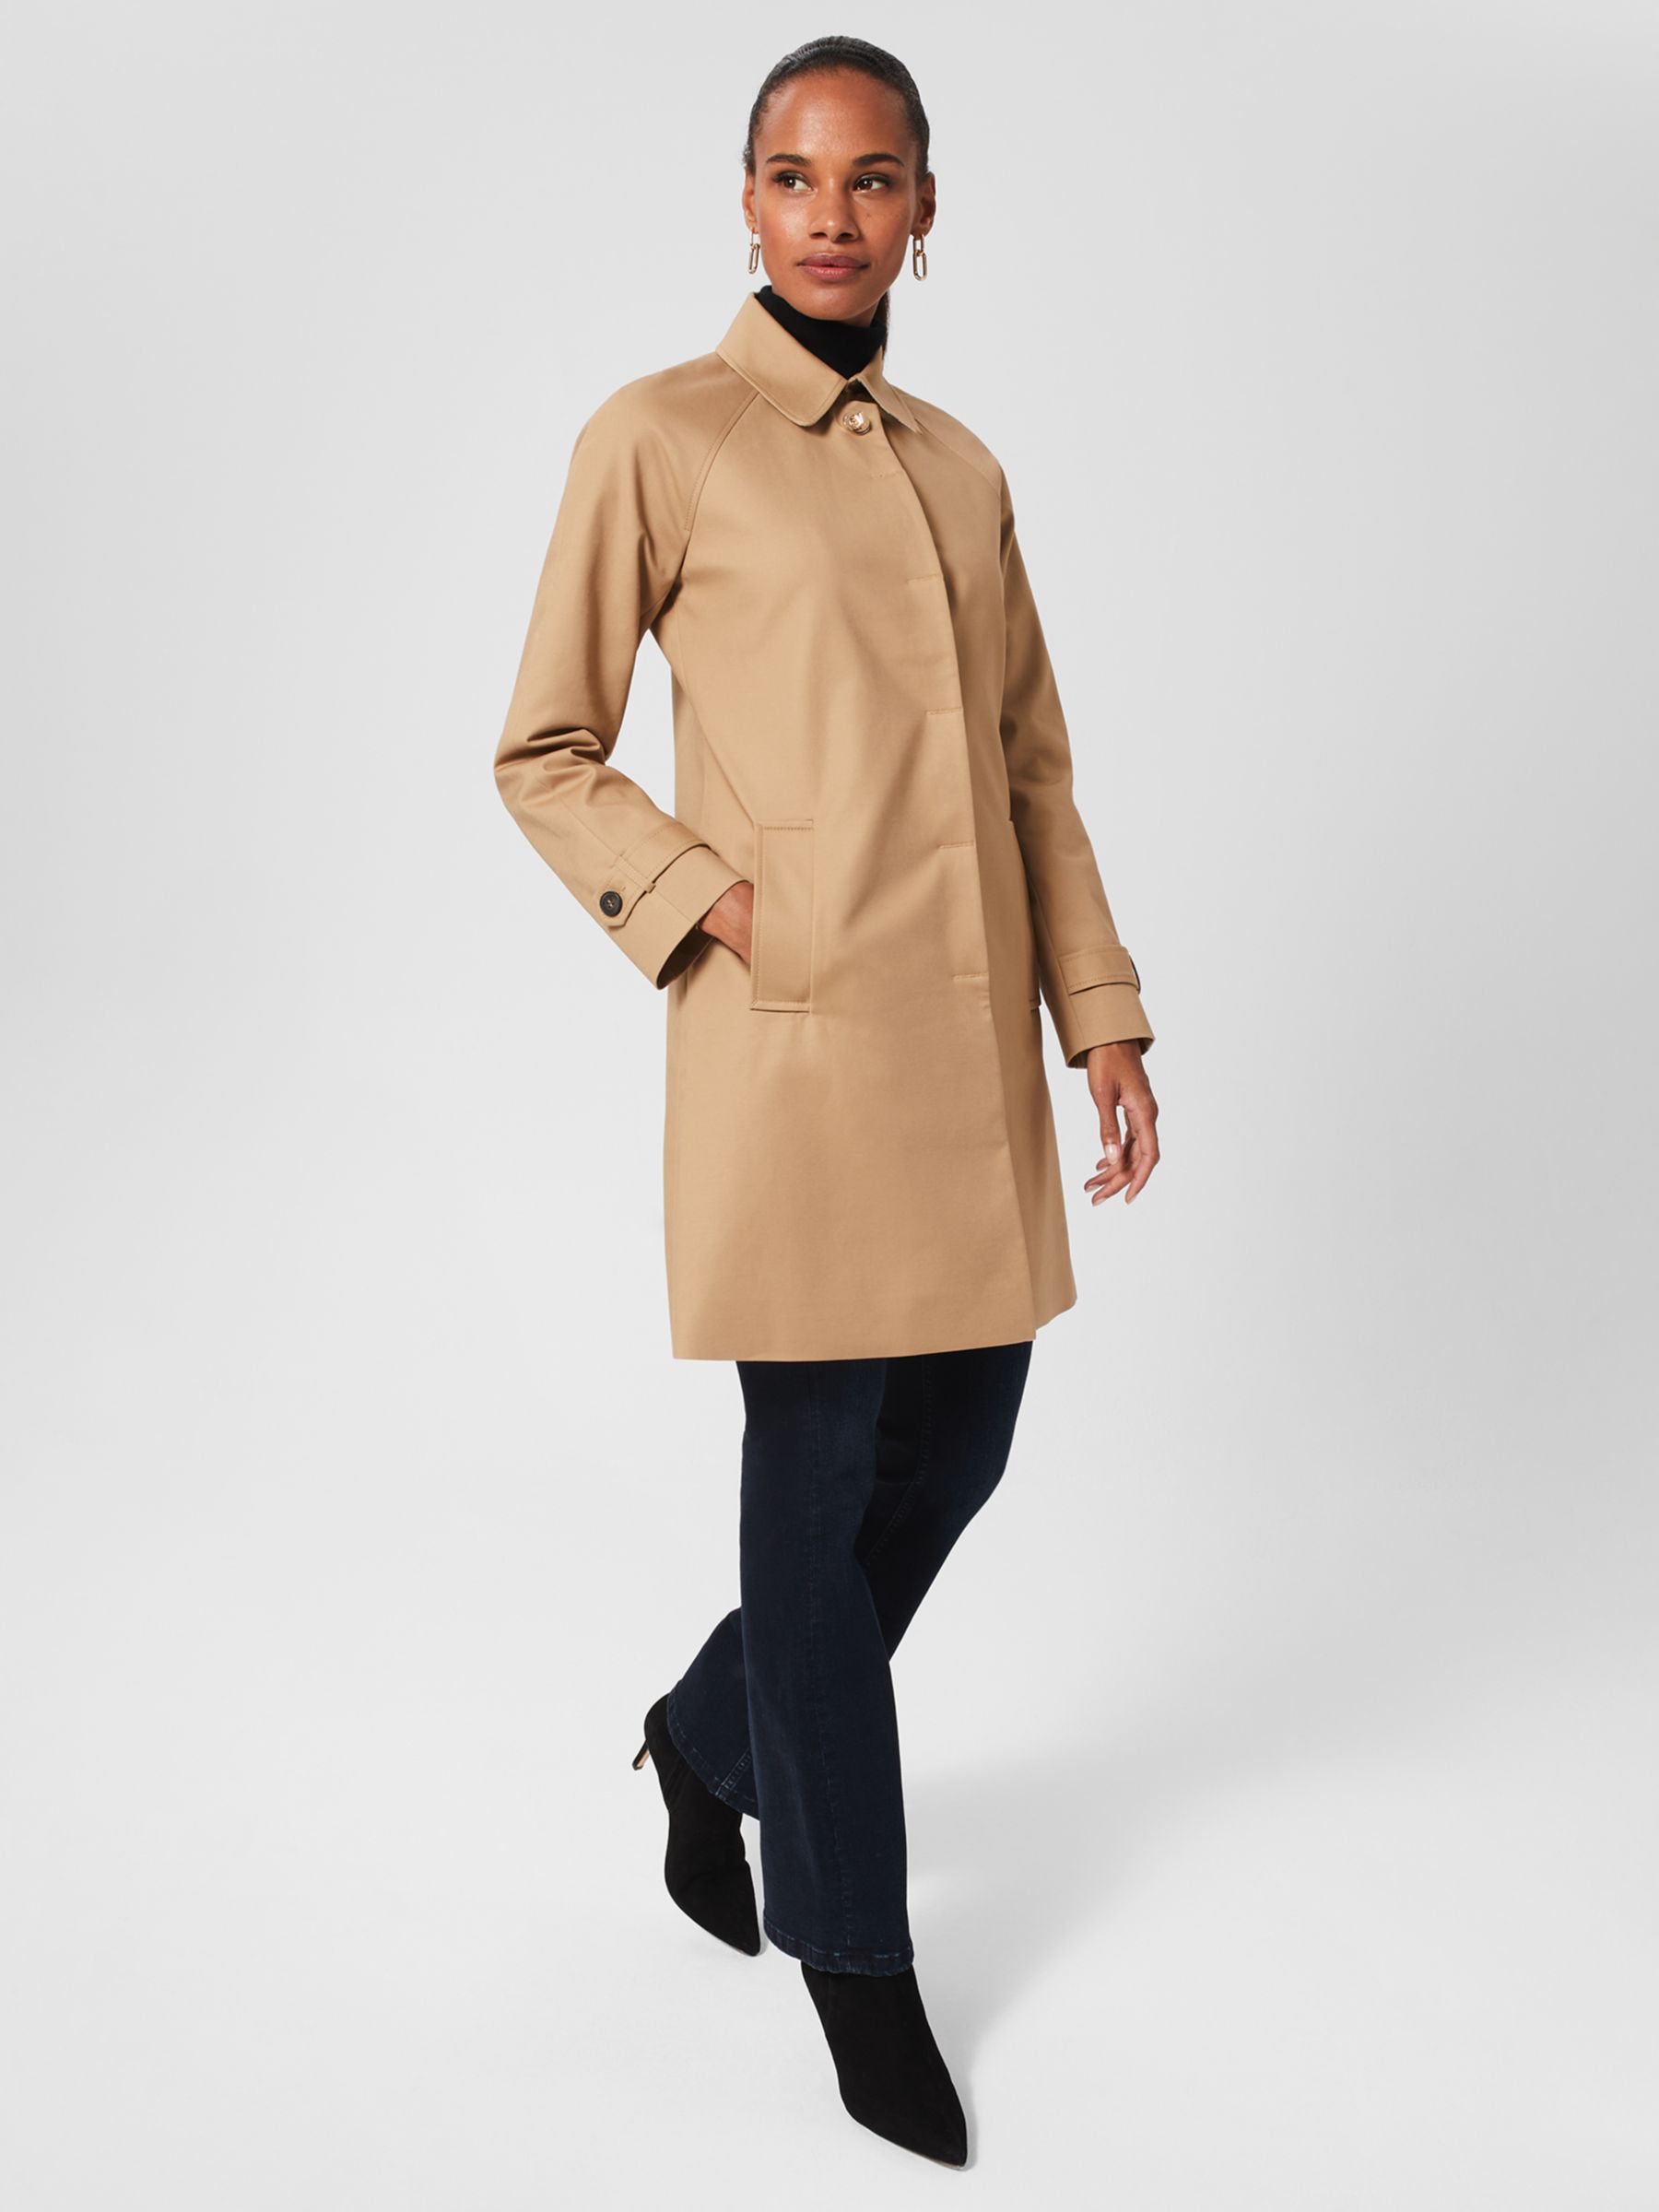 Jackets & Coats For Women, Wool Coats, Trenches & More, Hobbs London